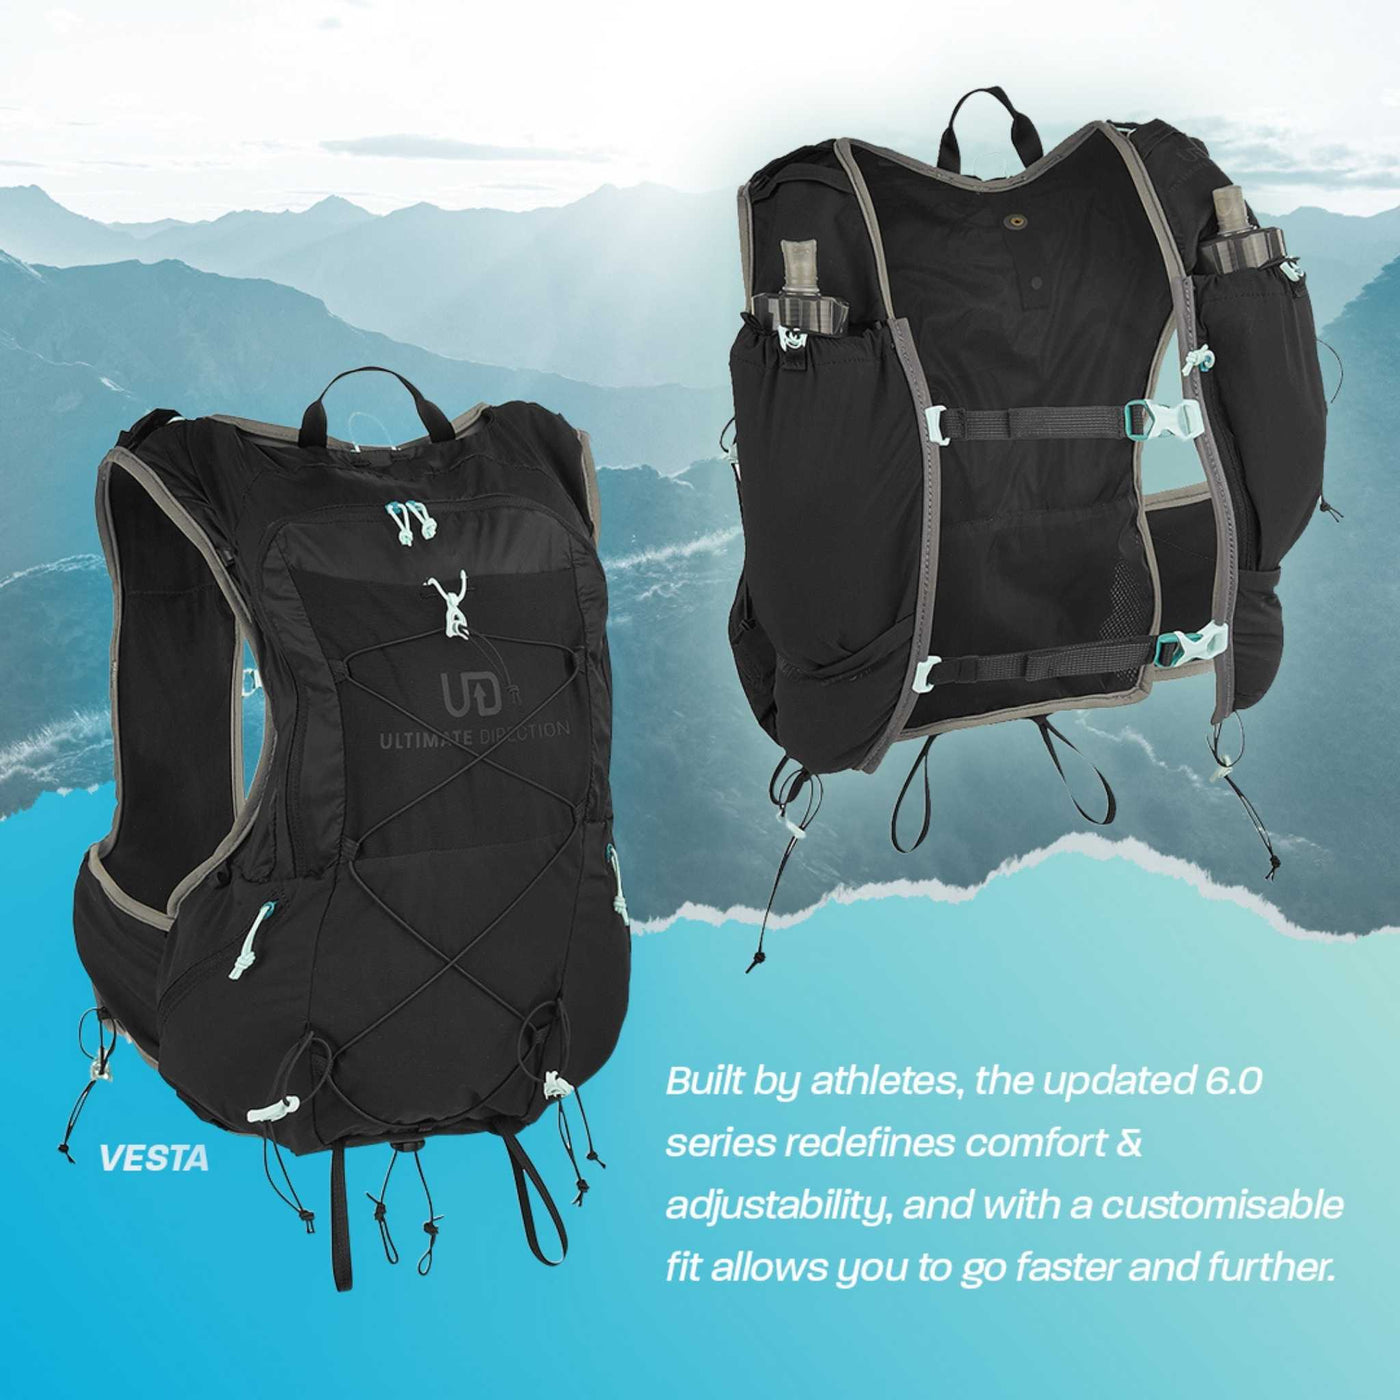 Ultimate Direction Mountain Vesta 6.0 | Women's Hydration Packs and Vests | Further Faster Christchurch NZ #onyx